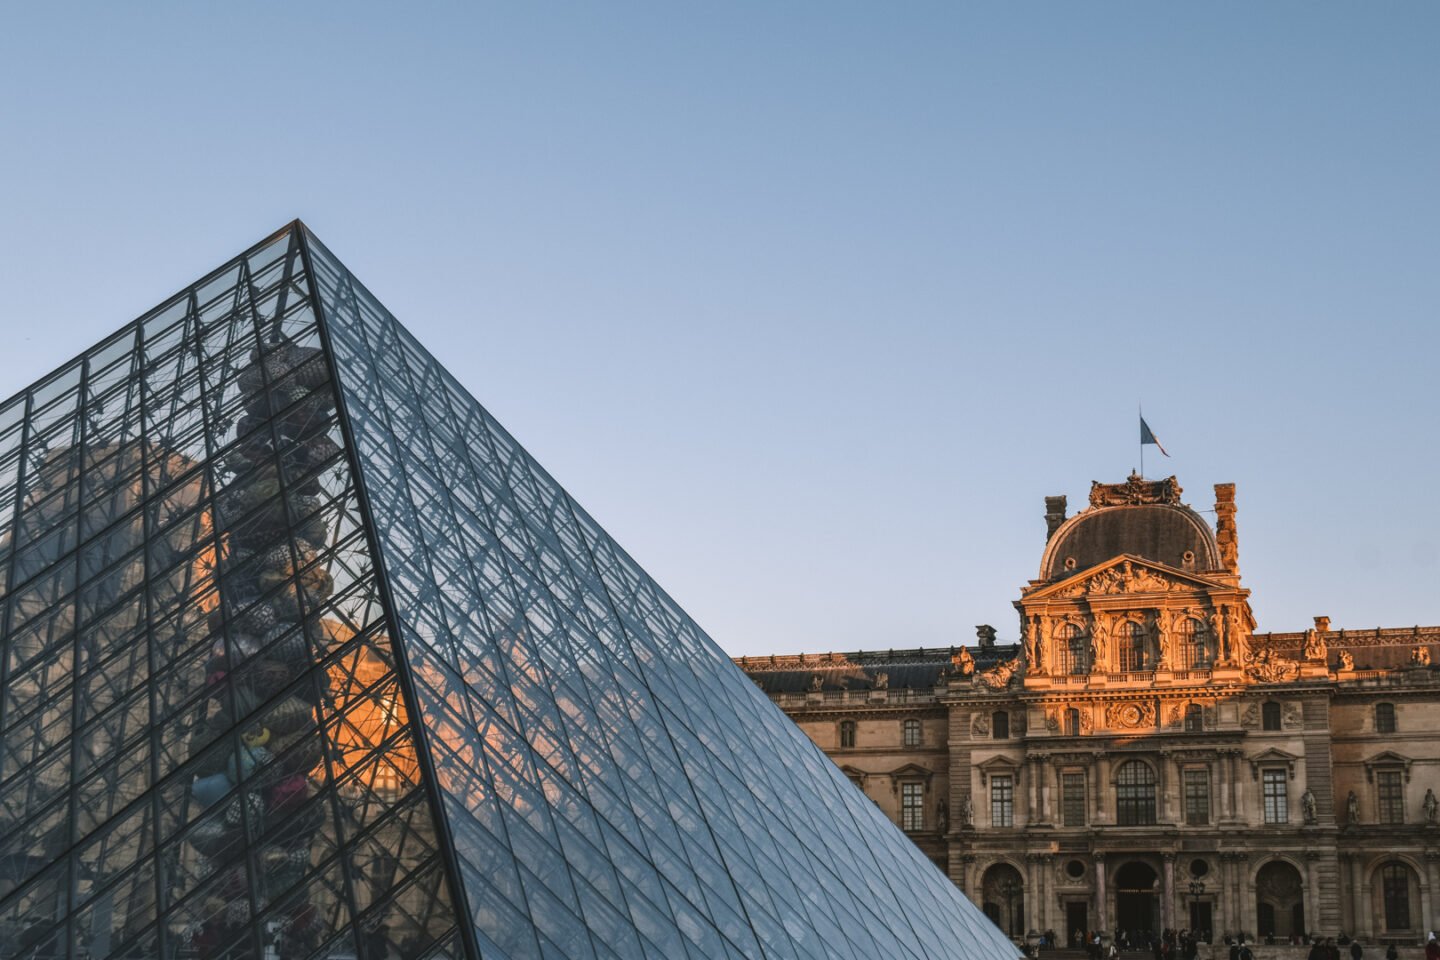 The Louvre, Paris and surrounding buildings at sunset